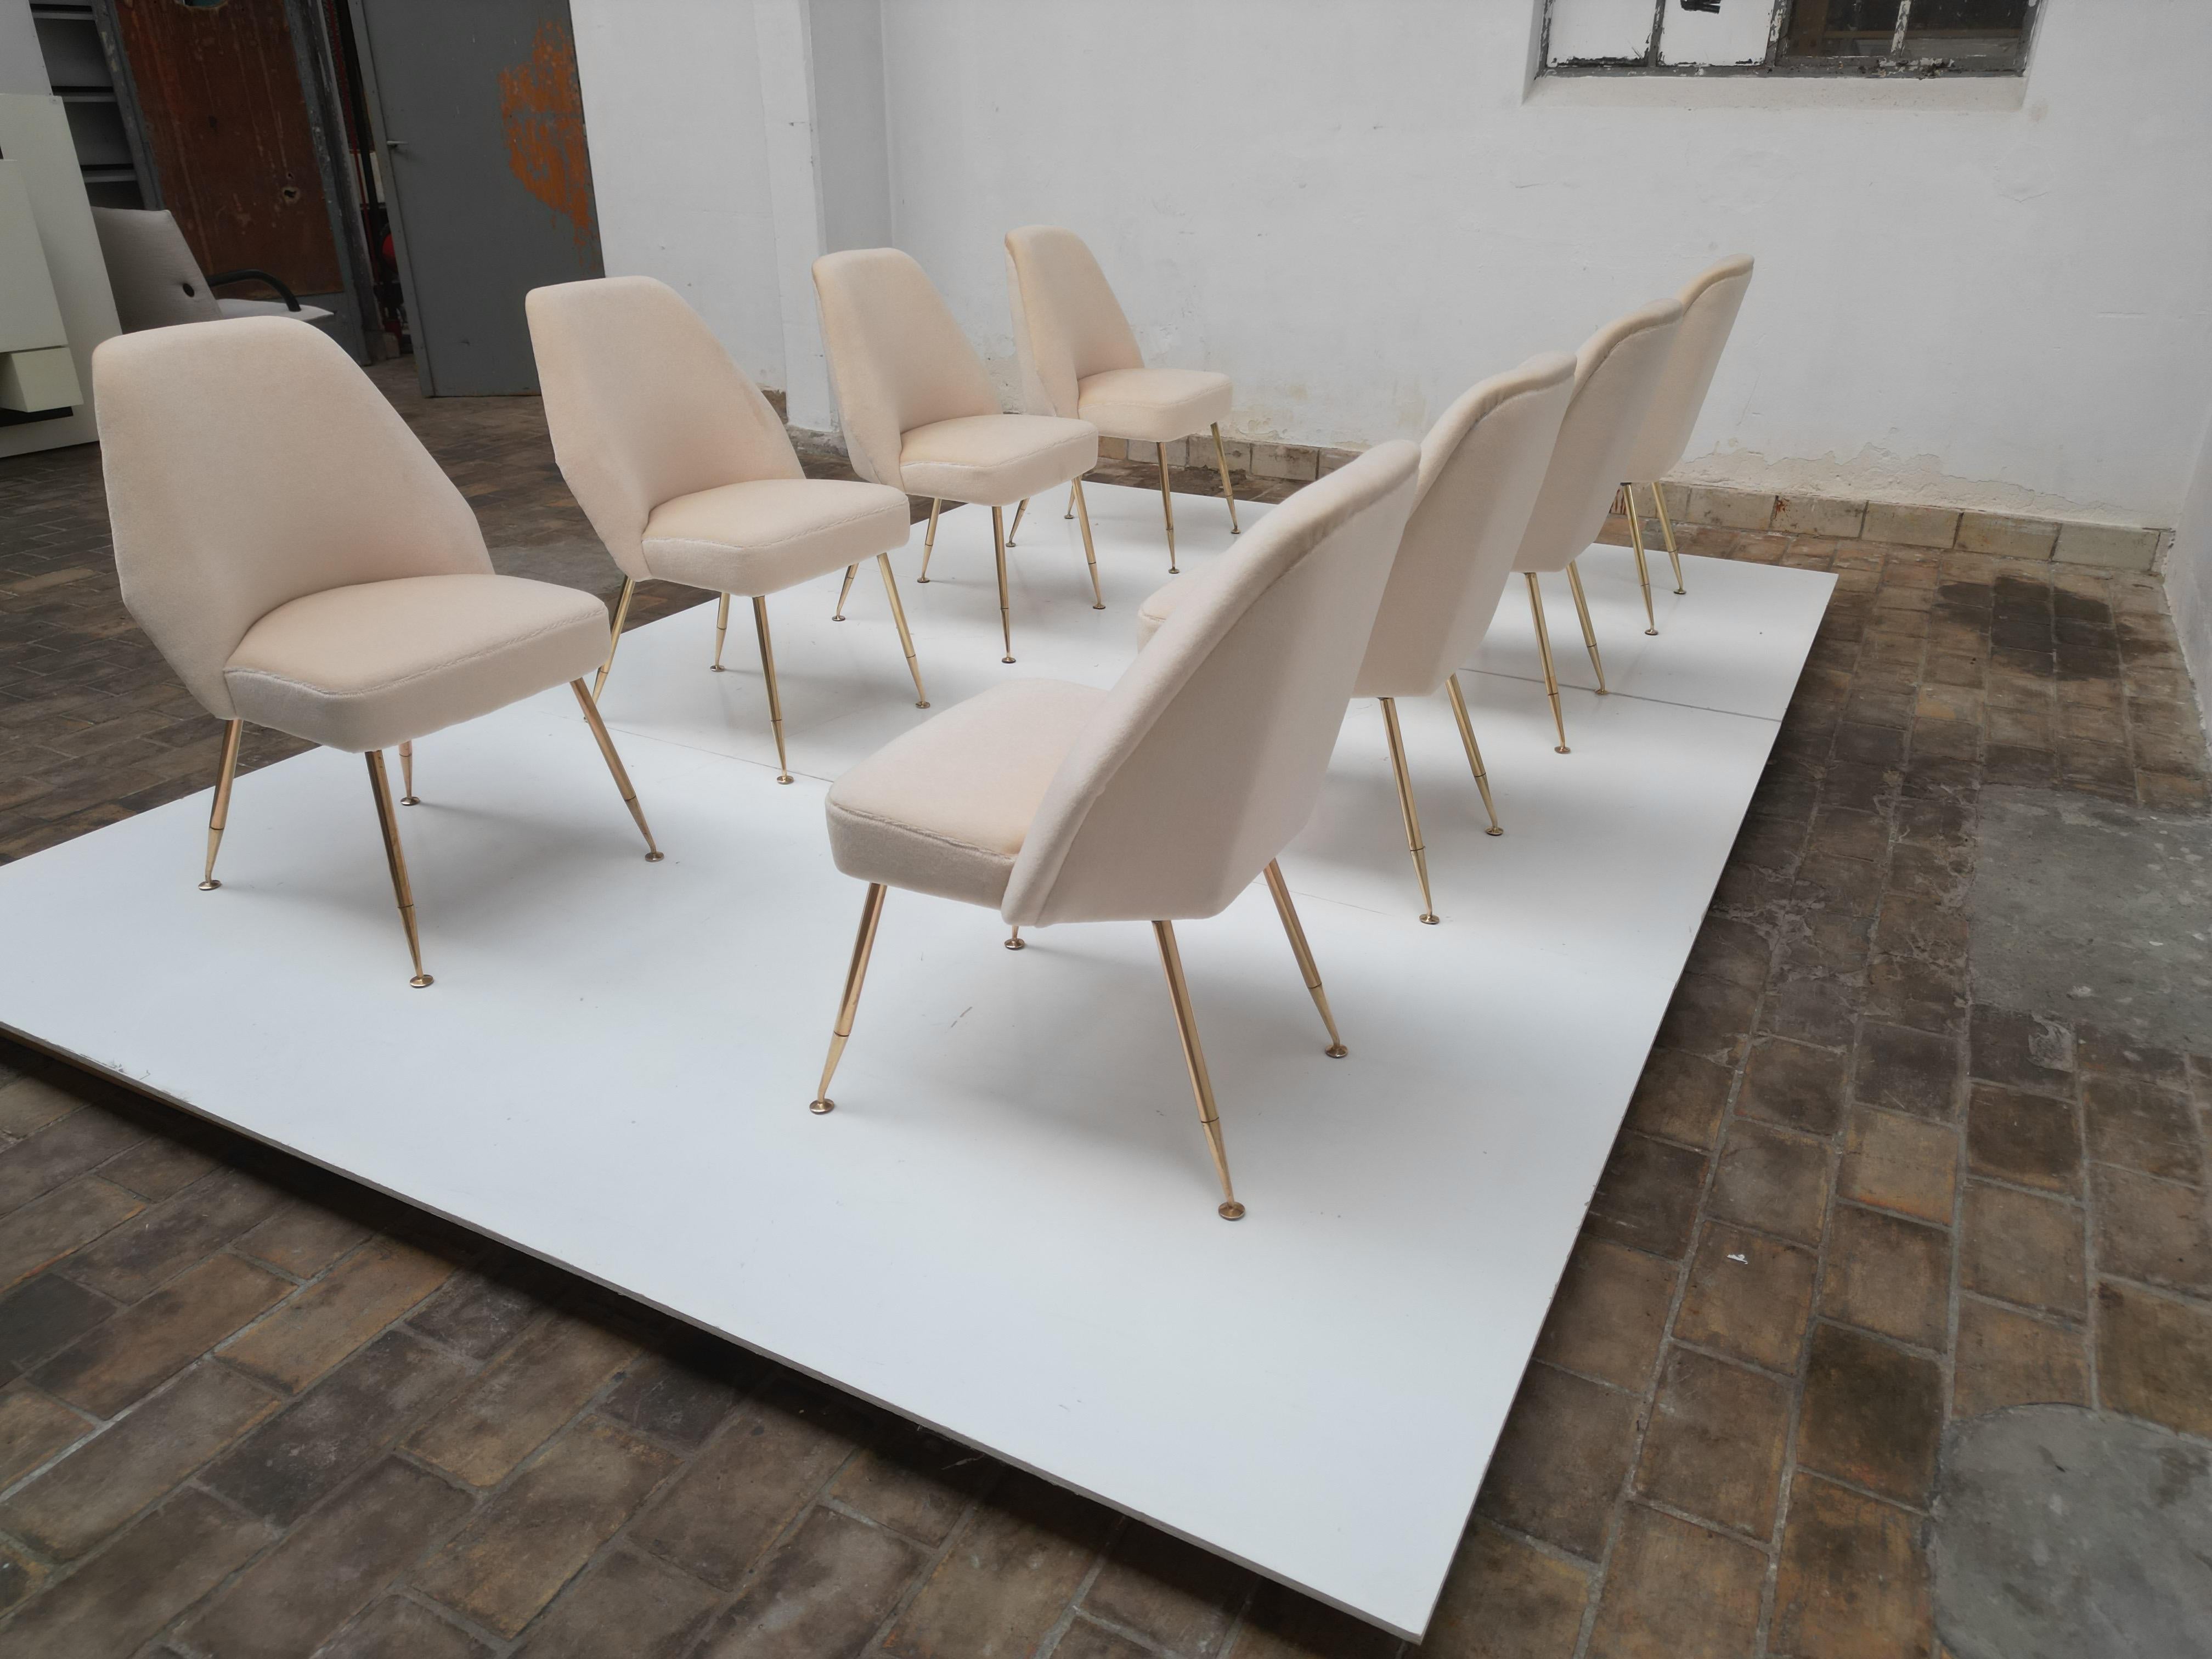 8 Brass Leg Chairs by Pagani, Partner of Gio Ponti & Lina Bo Bardi, 1952, Arflex In Good Condition In bergen op zoom, NL